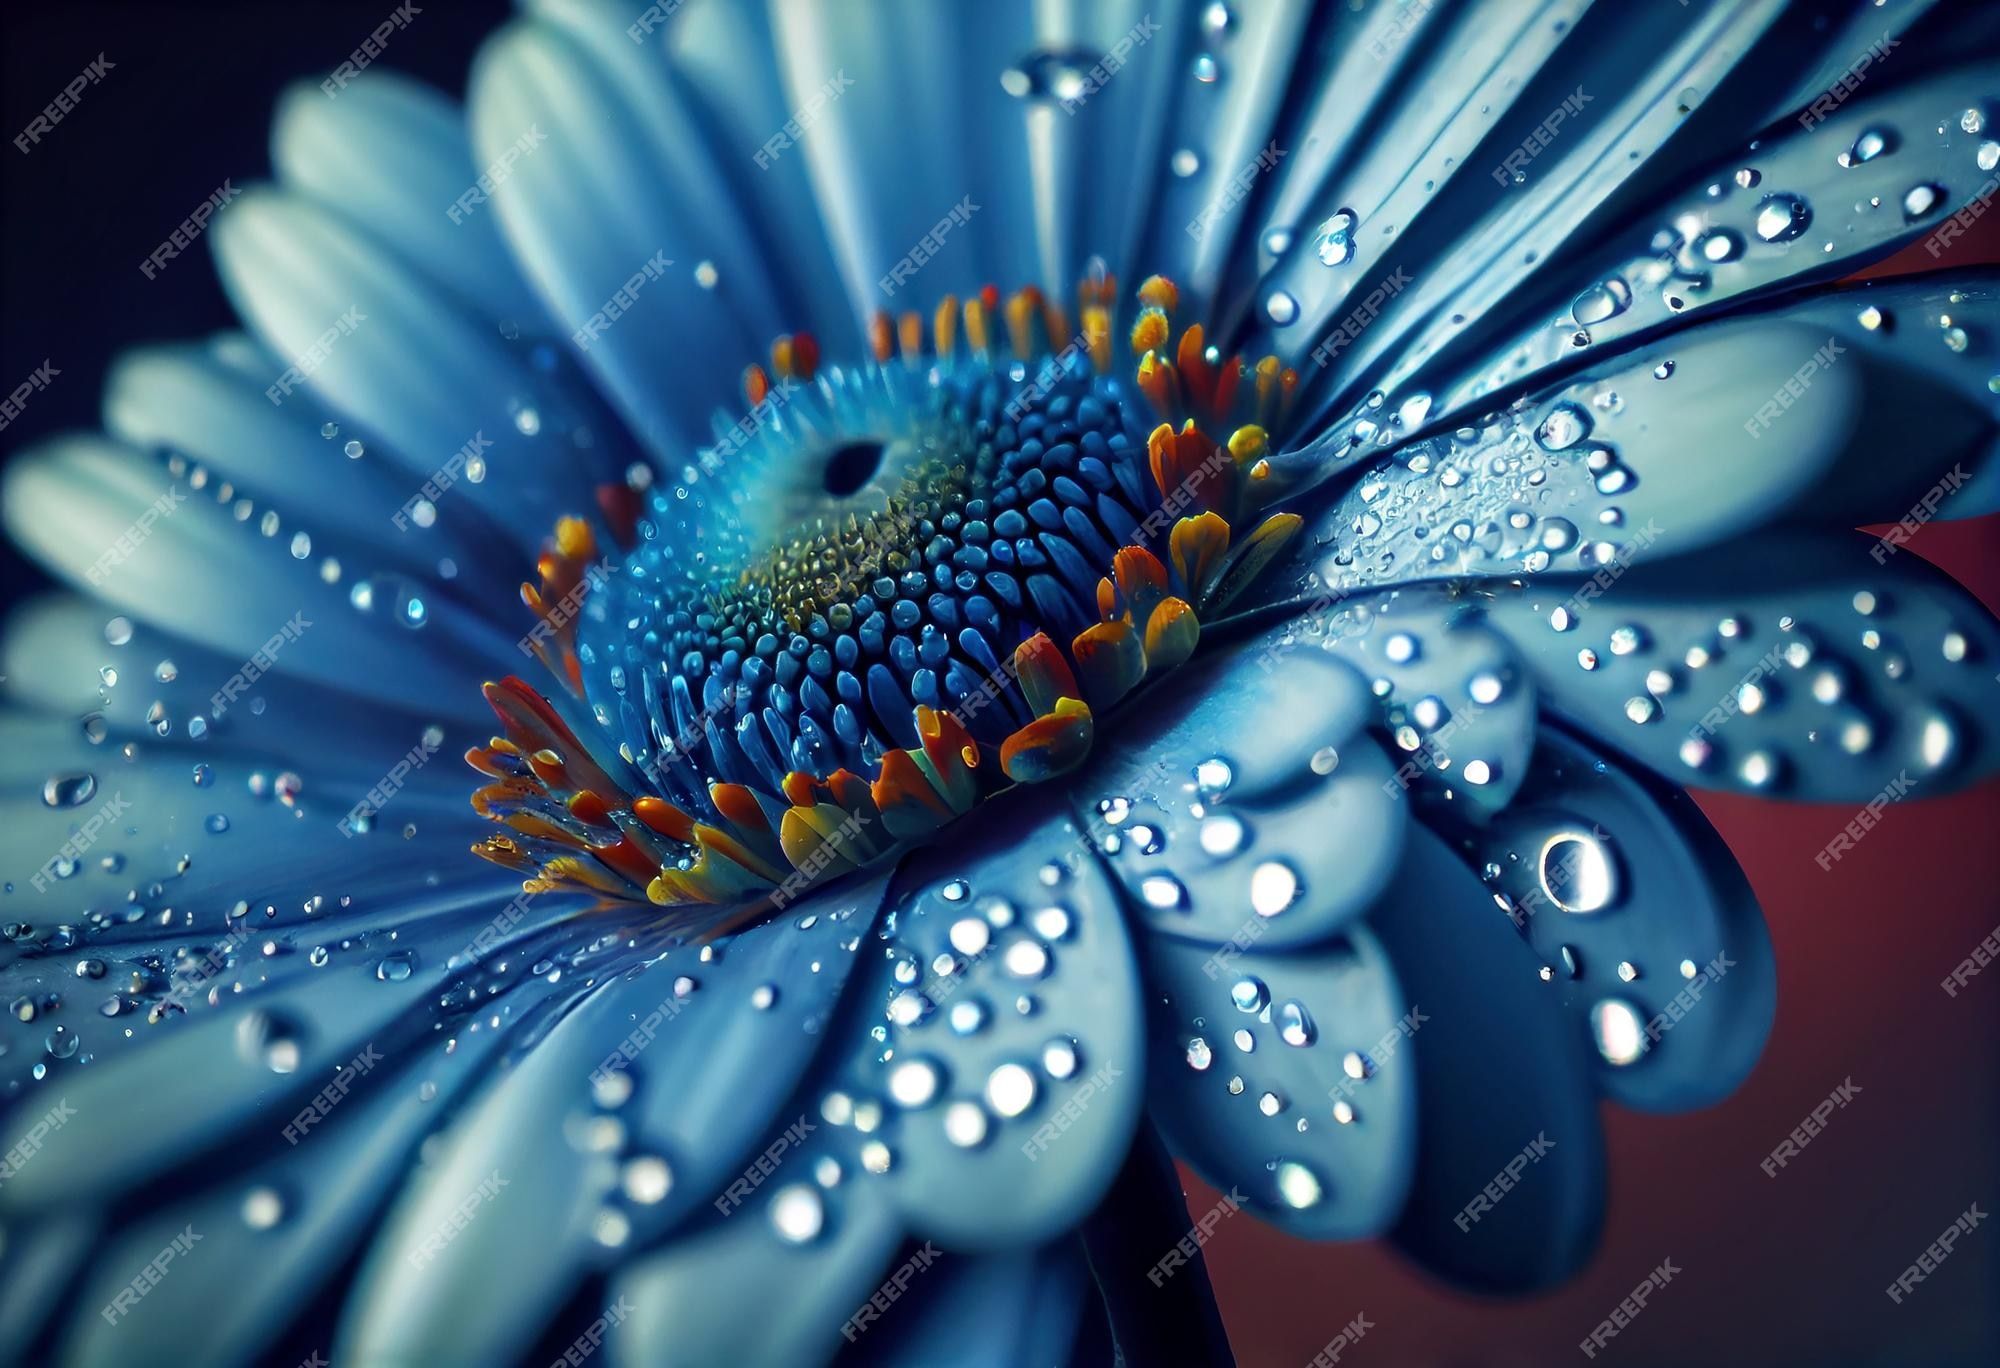 A macro image of a blue flower with water droplets on it - Macro